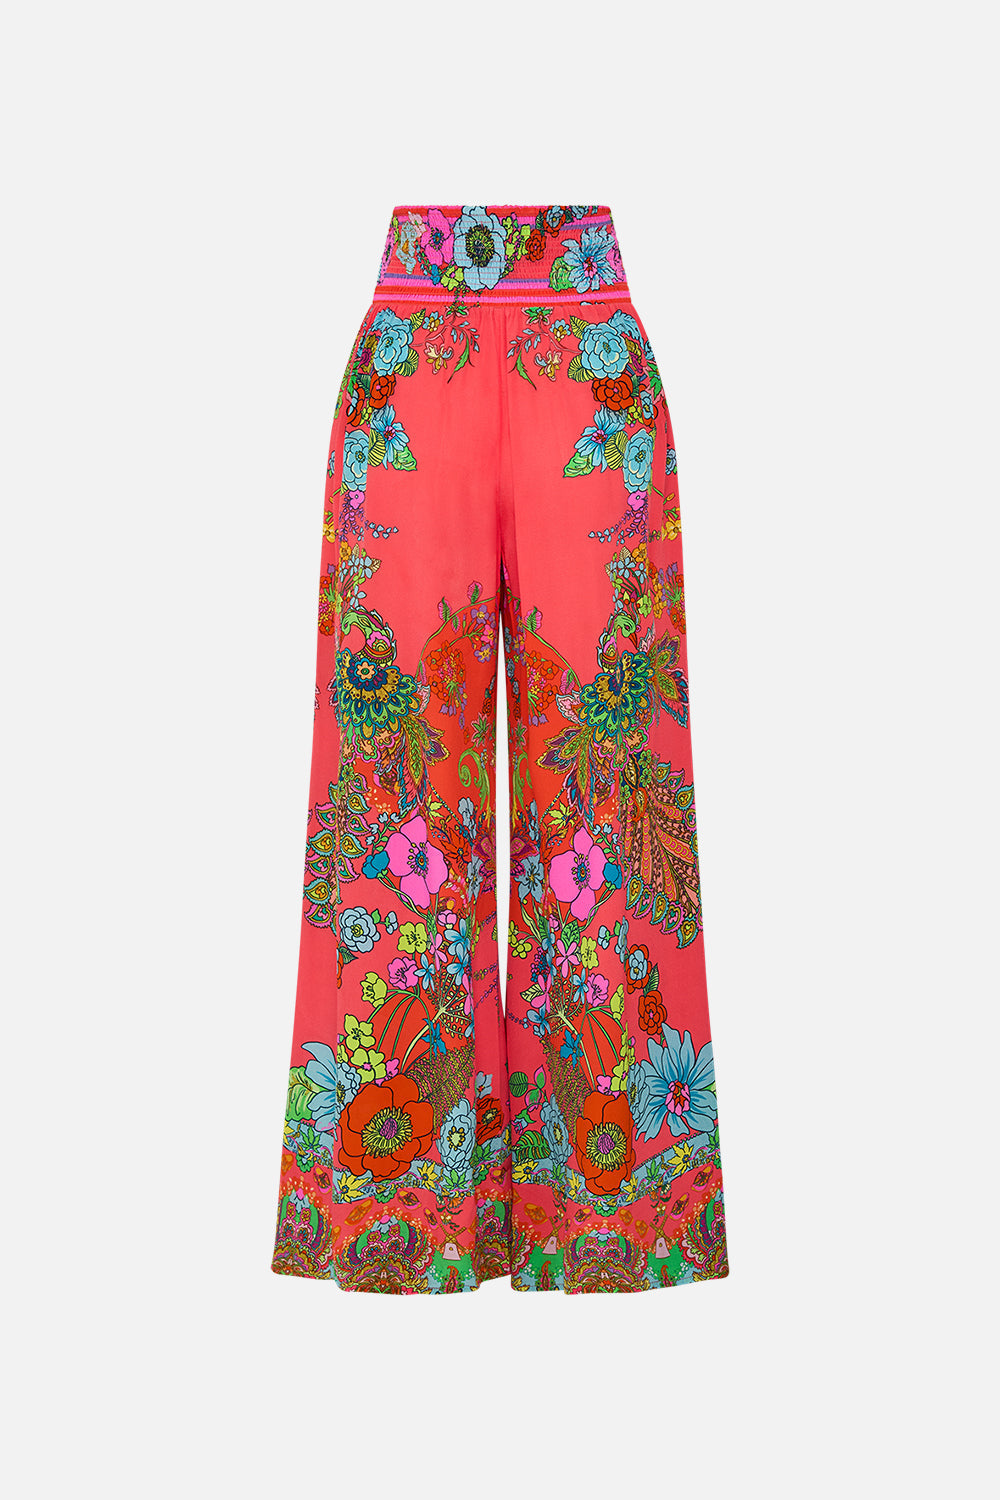 CAMILLA pink shirred waist pant in Windmills And Wildflowers print.